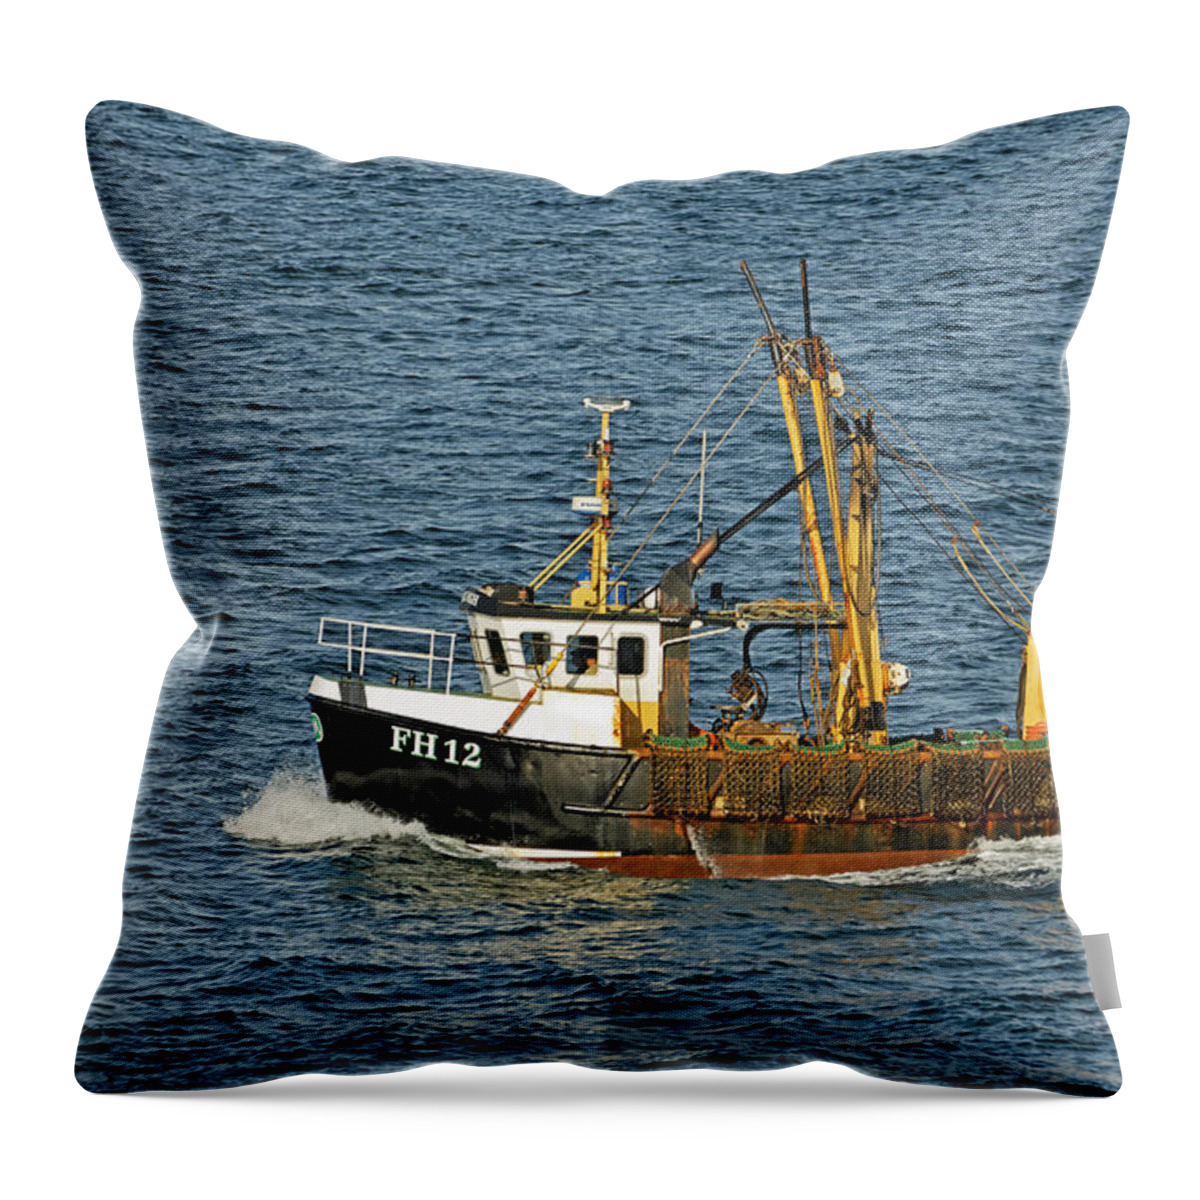 Europe Throw Pillow featuring the photograph Fishing Boat FH12 off Pendennis Point by Rod Johnson